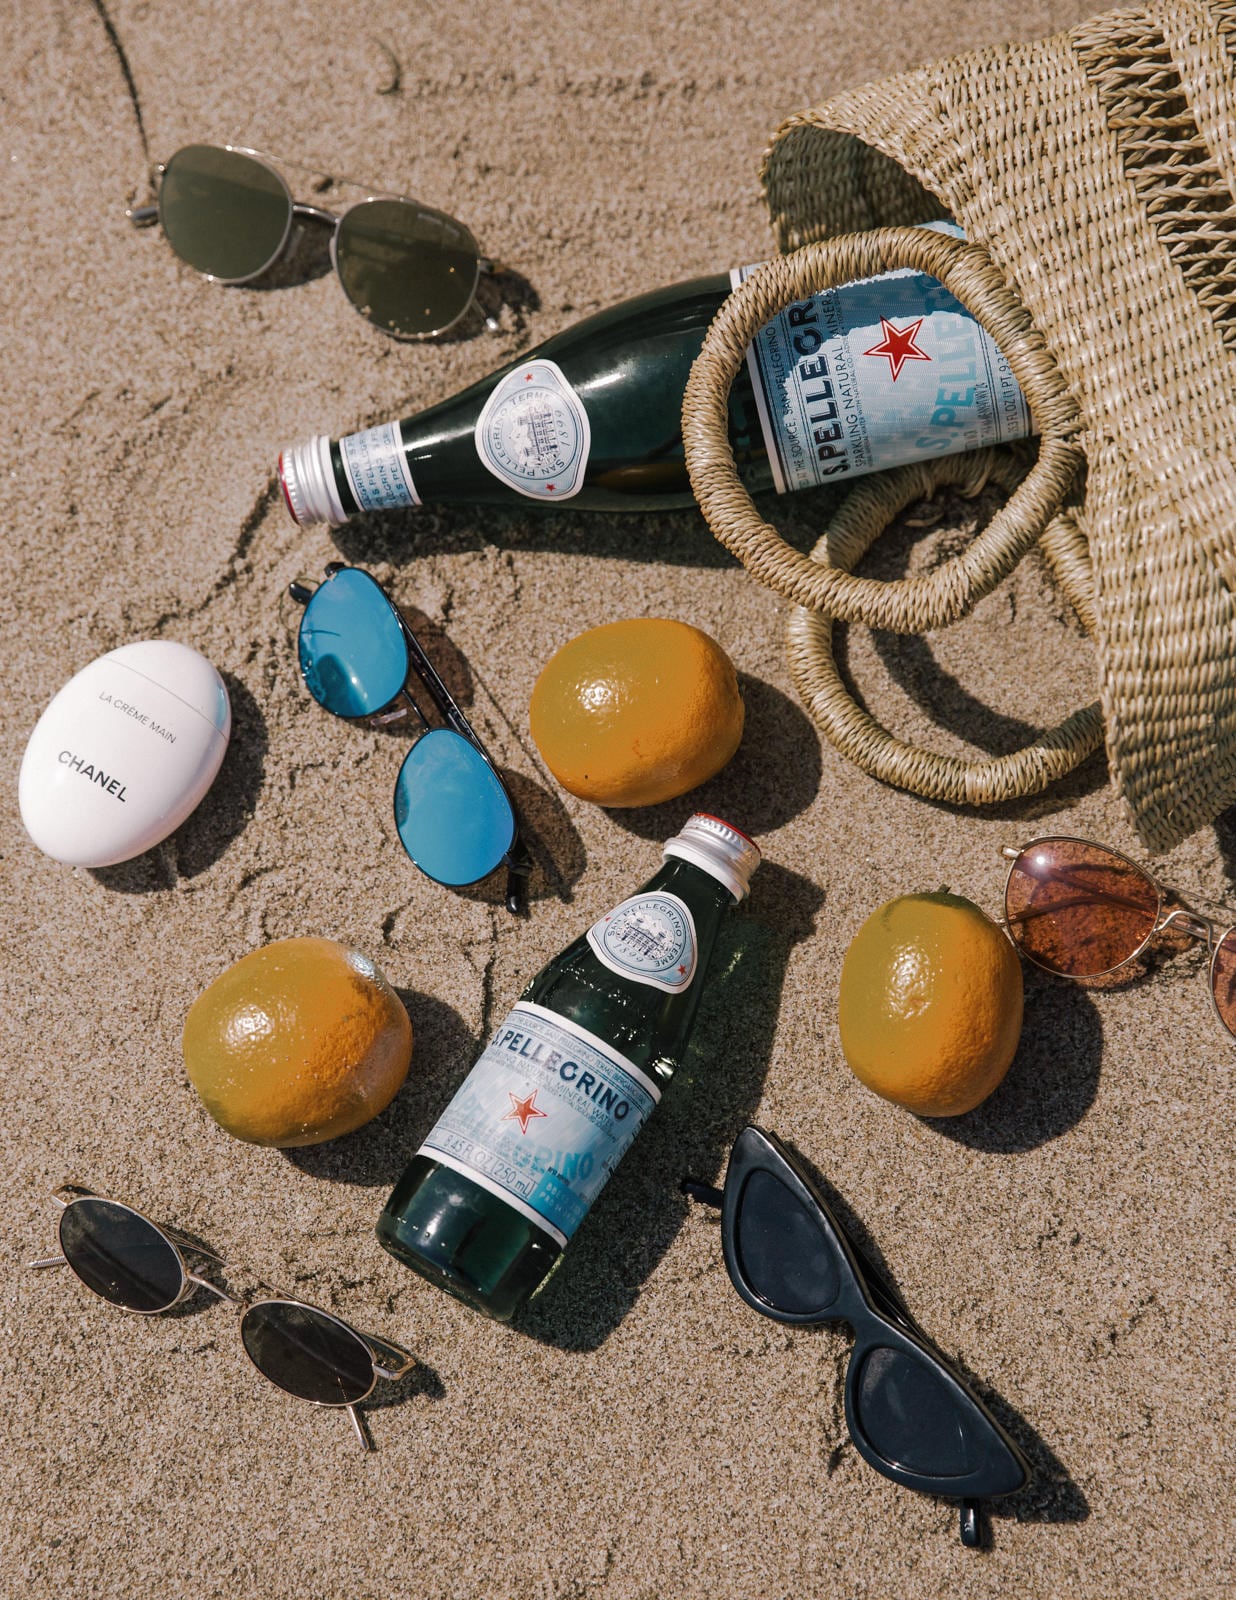 Sunglasses I Can't Stop Wearing This Summer by Pam Hetlinger | Beach Flatlay, sunglasses trends